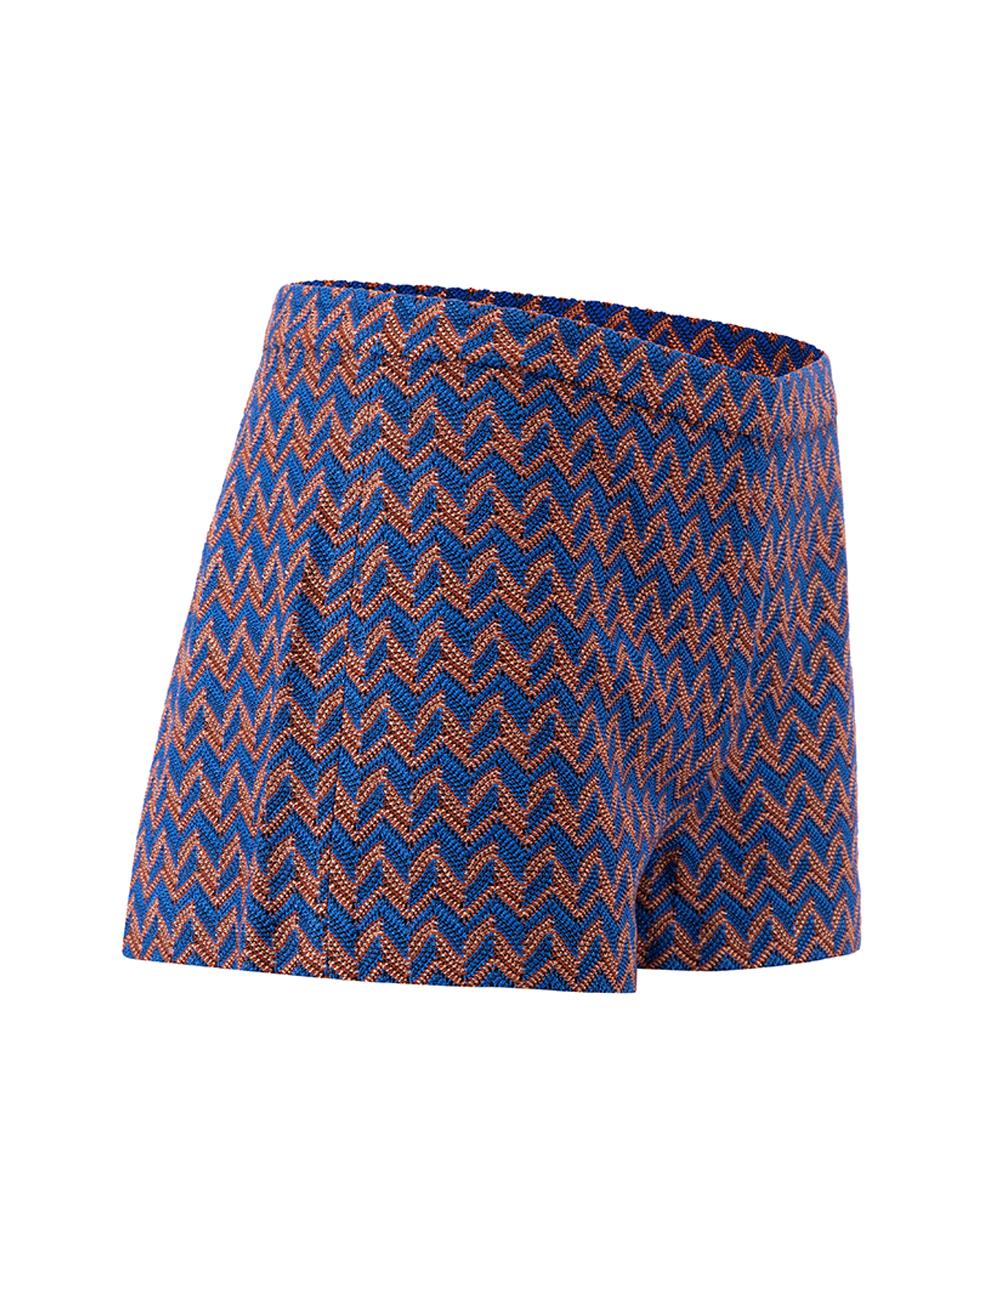 CONDITION is Never Worn. No visible wear to shorts is evident on this used Missoni designer resale item. Details Blue and brown Viscose Zig zag pattern Short shorts Side zip Button fastening Made in Italy Composition Feels like: 100% viscose Care